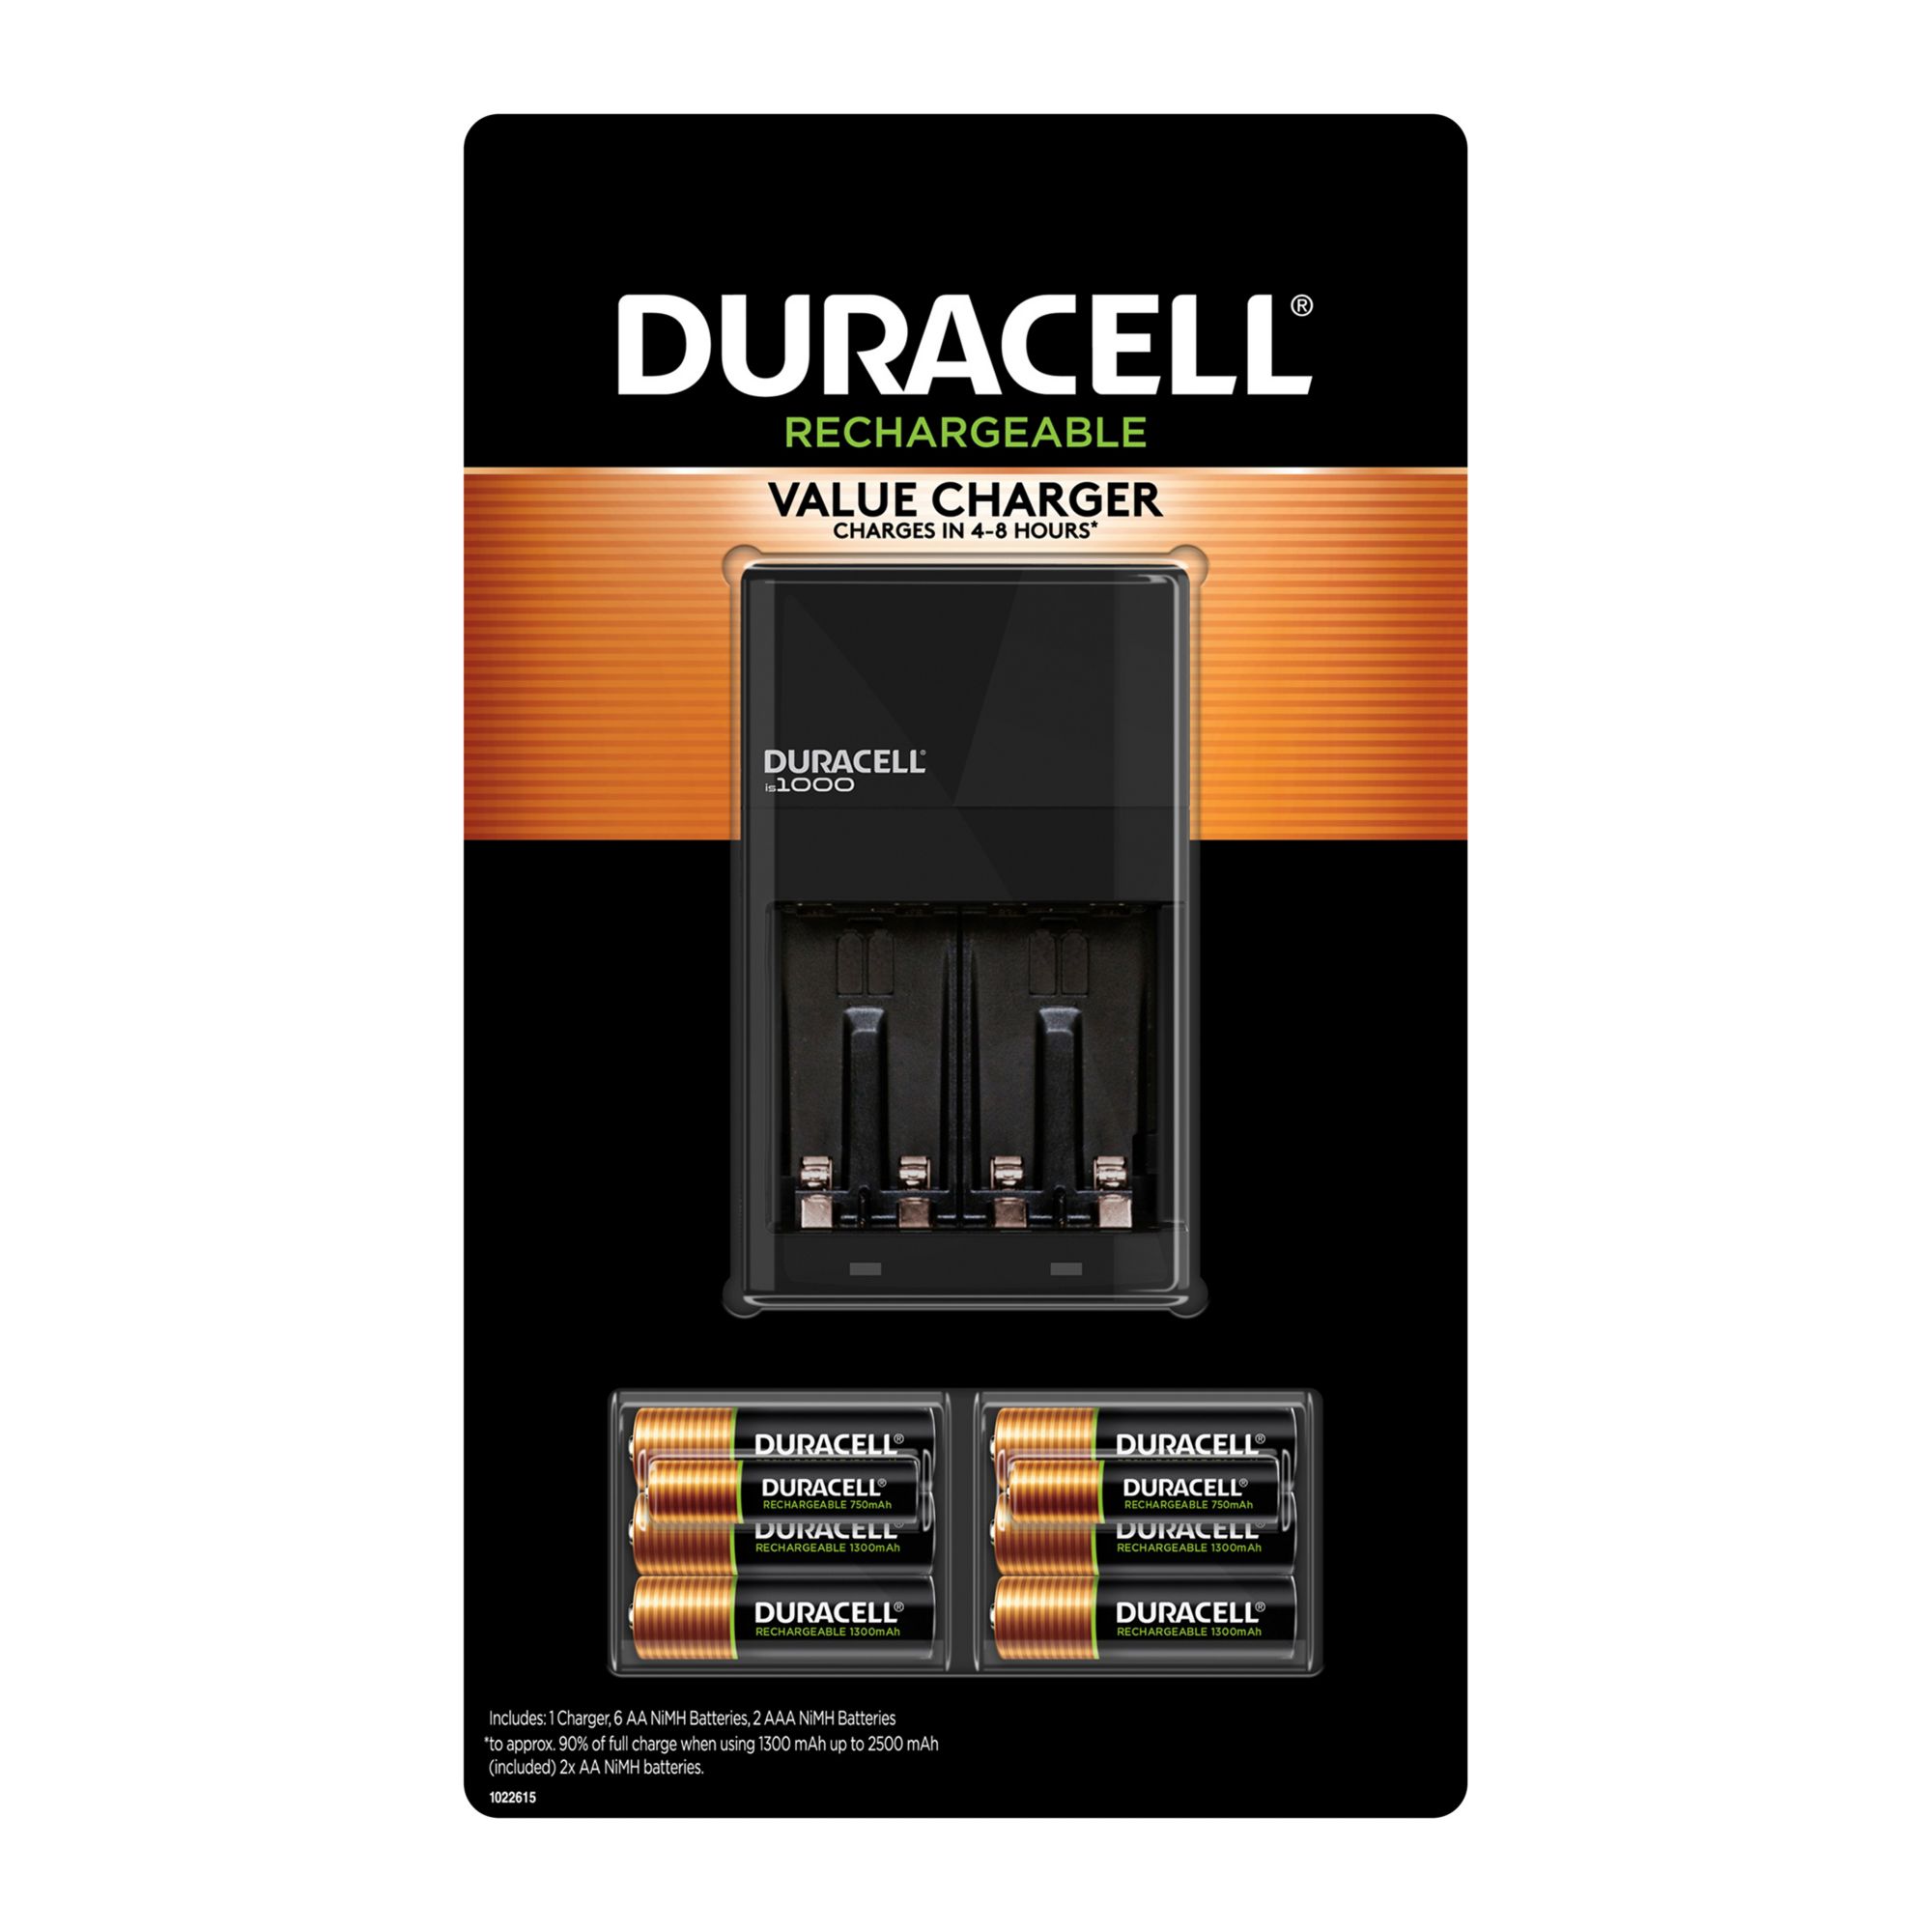 Buy Duracell Rechargeable AAA Batteries, pre-charged - Pack of 4